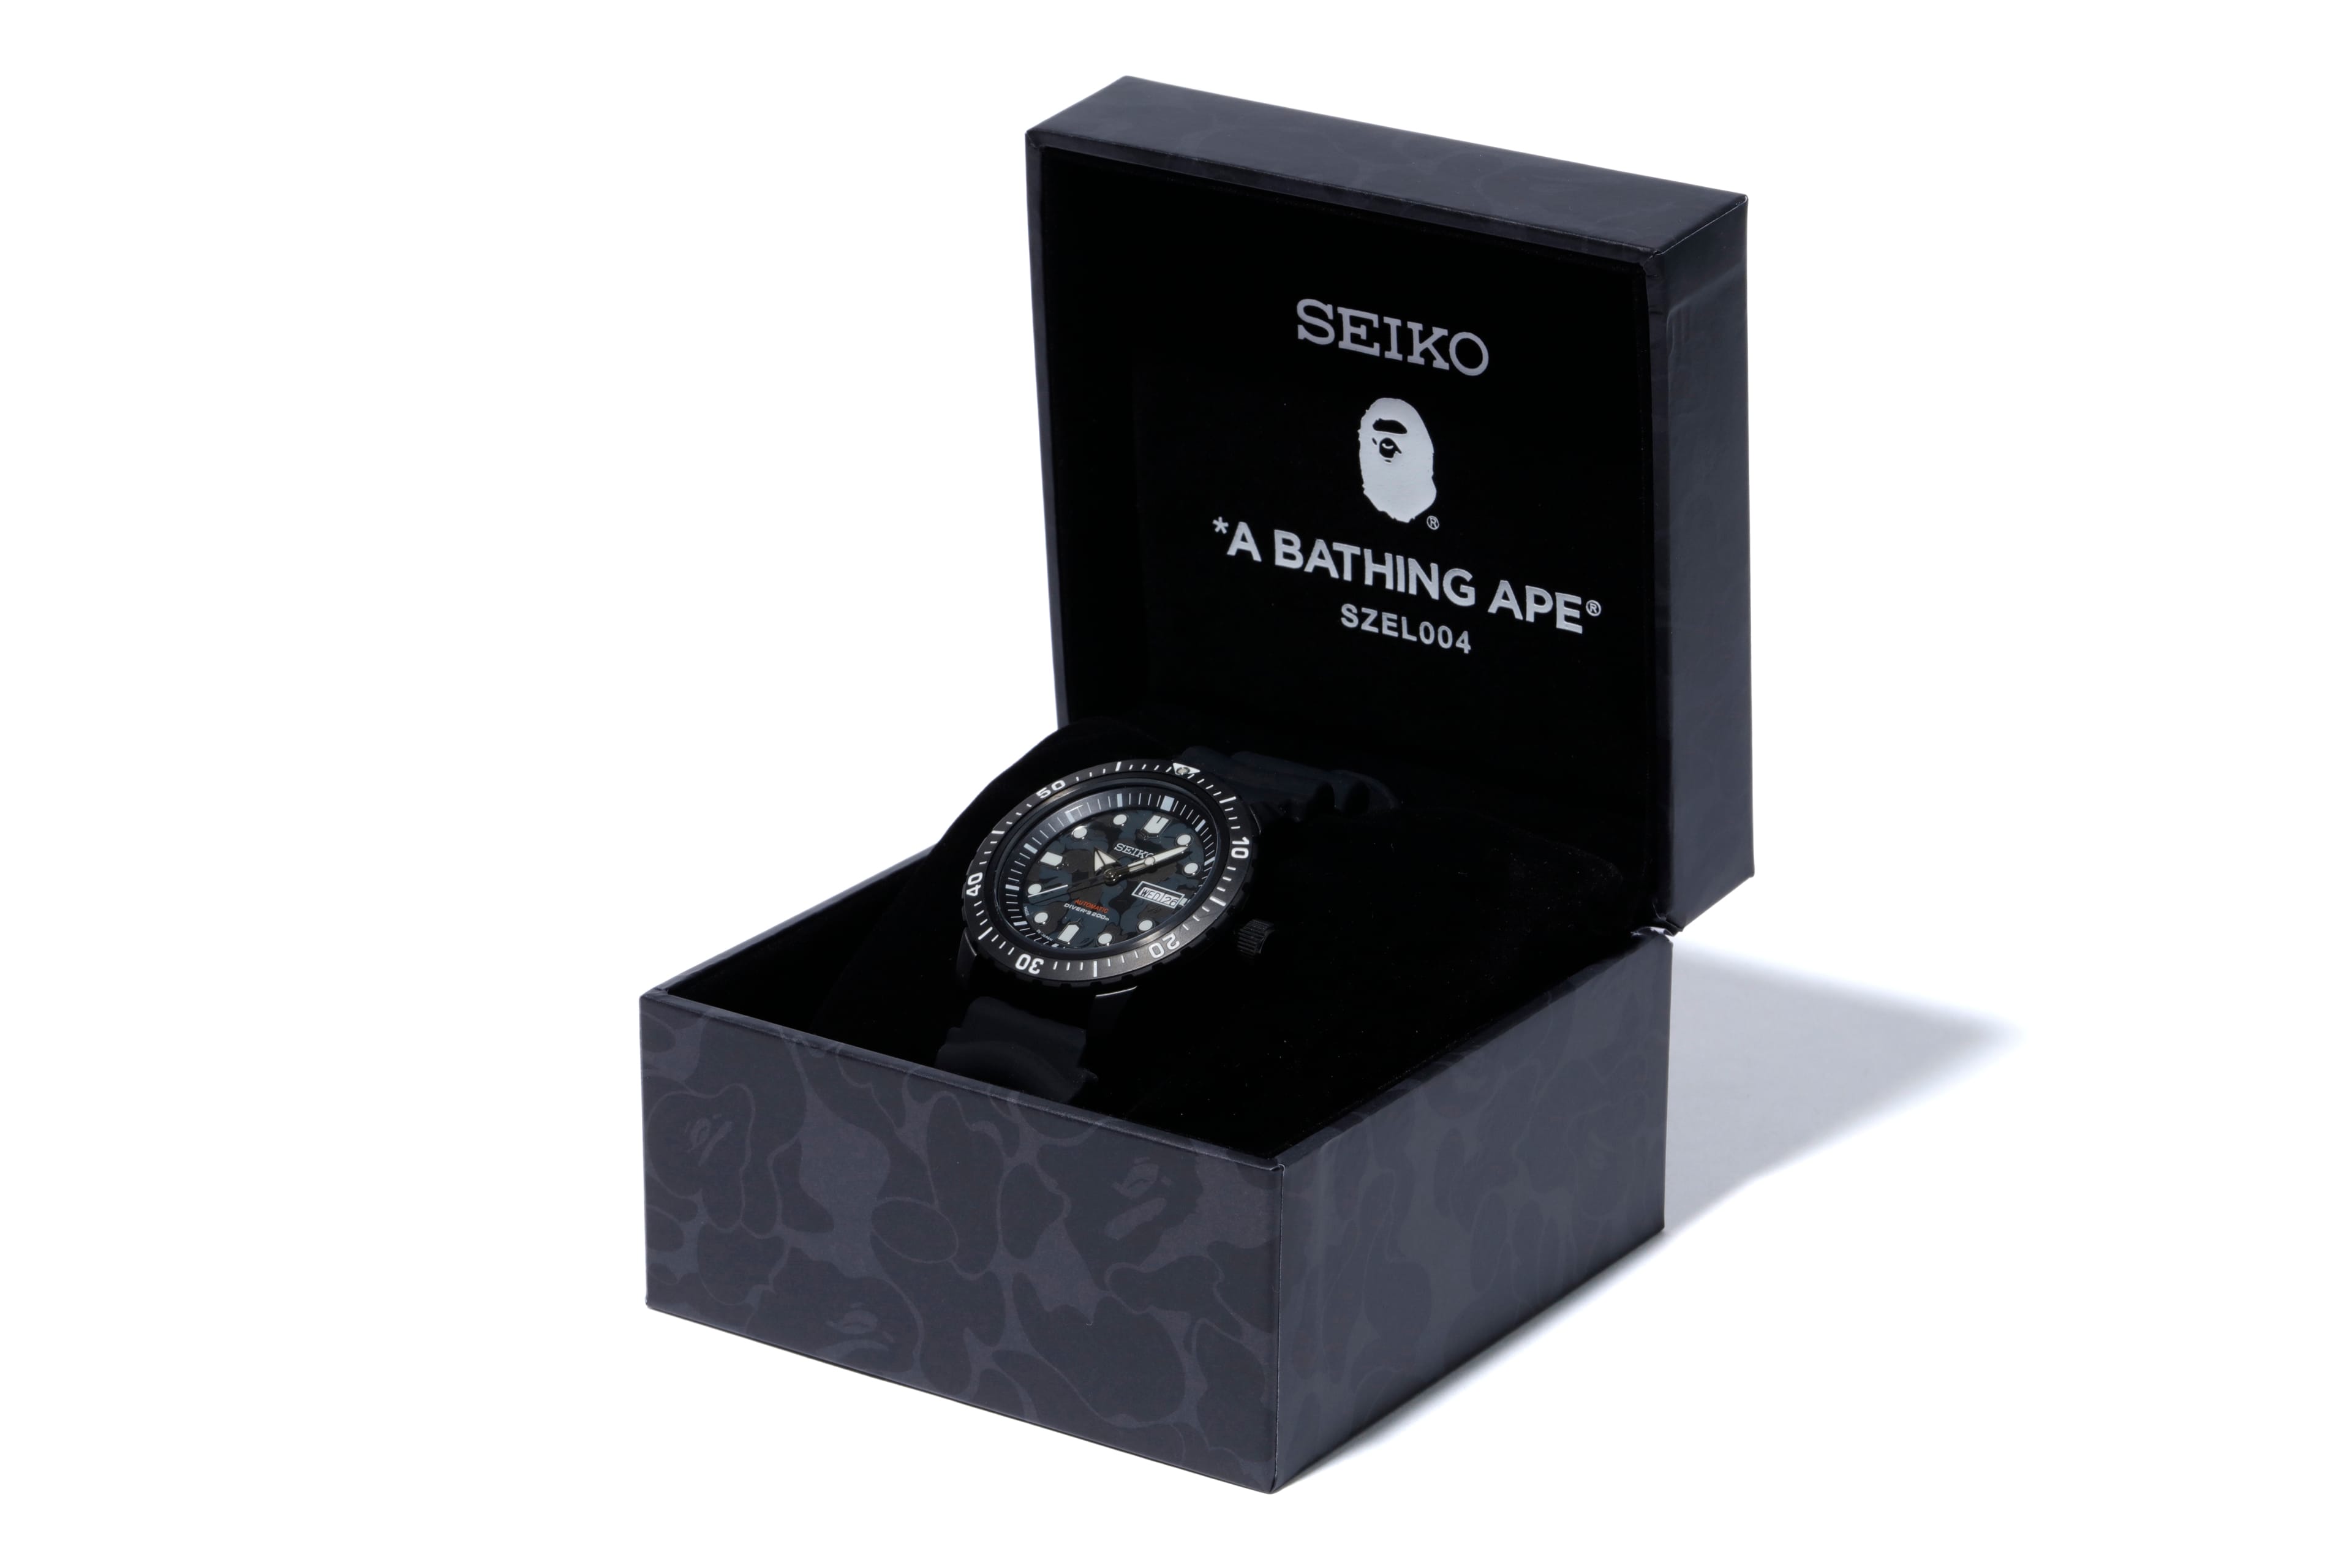 BAPE and Seiko Unveil Diver's Watch in Black and Gray Camo | Hypebeast